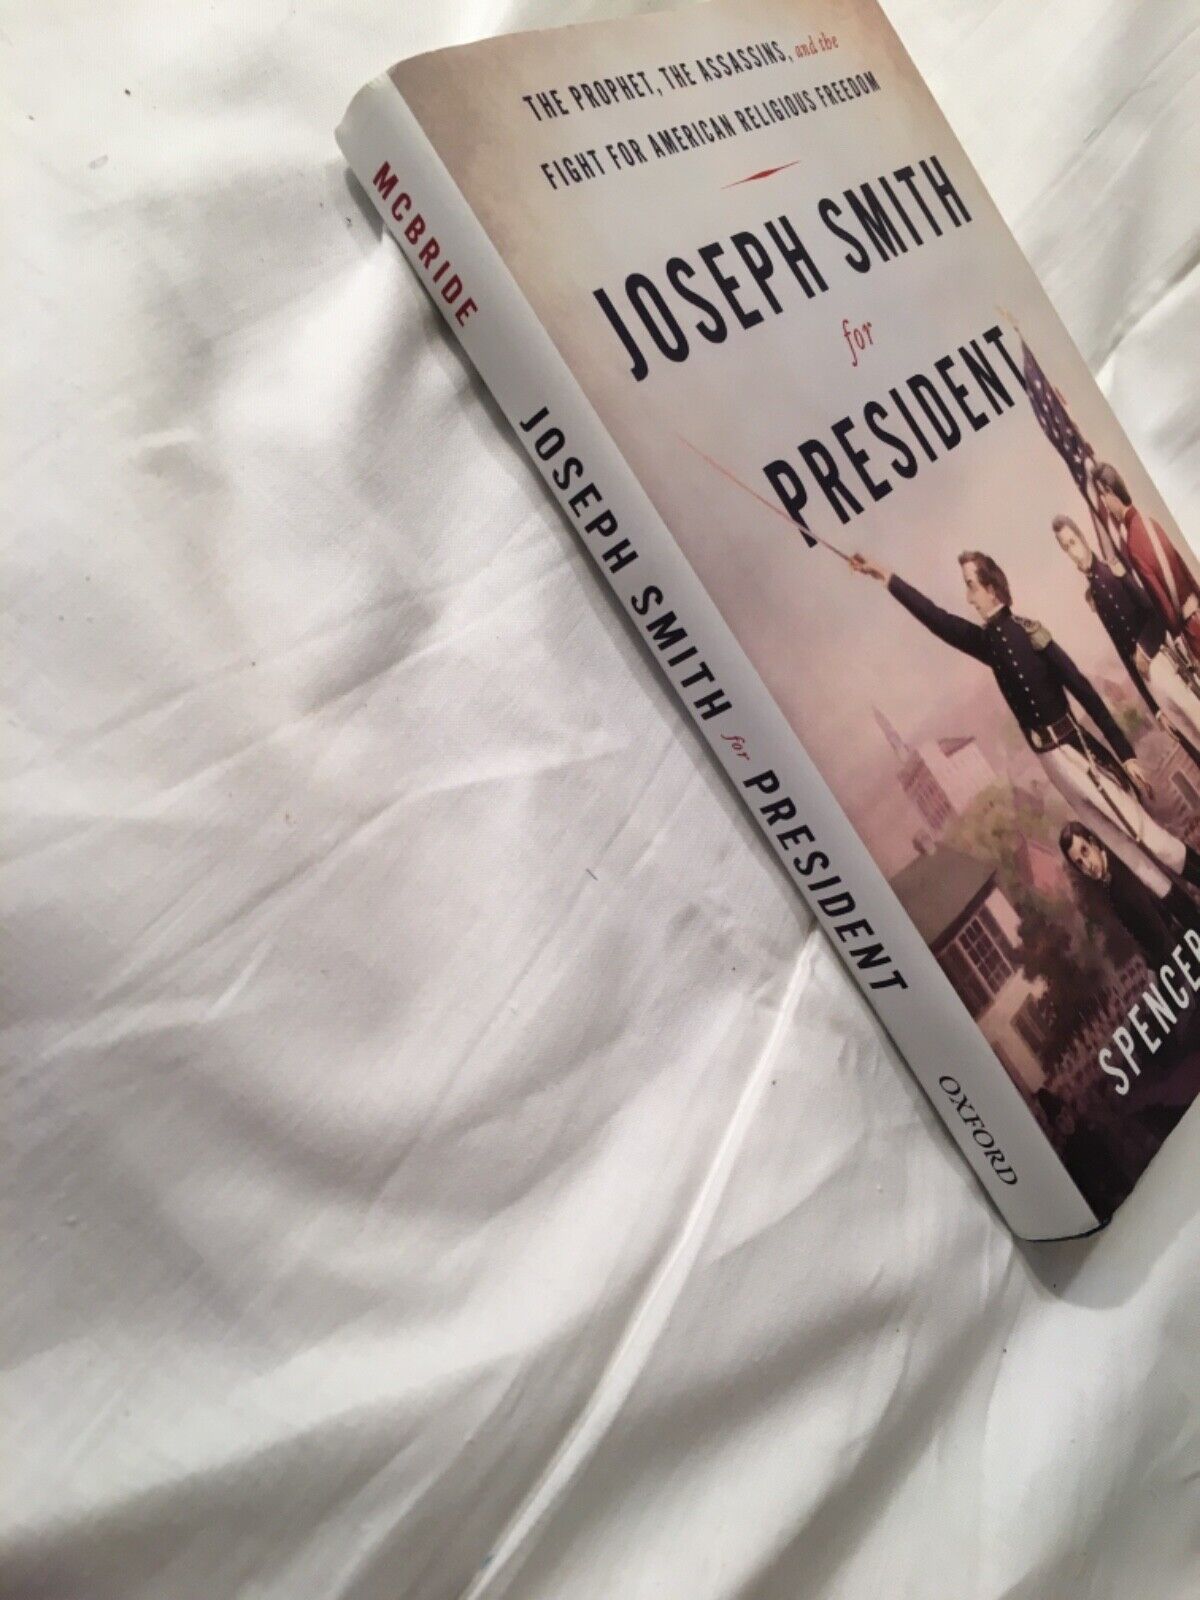 Joseph Smith for President: the Prophet, the Assassins & the Fight for American Religious Freedom by Spencer W. McBride